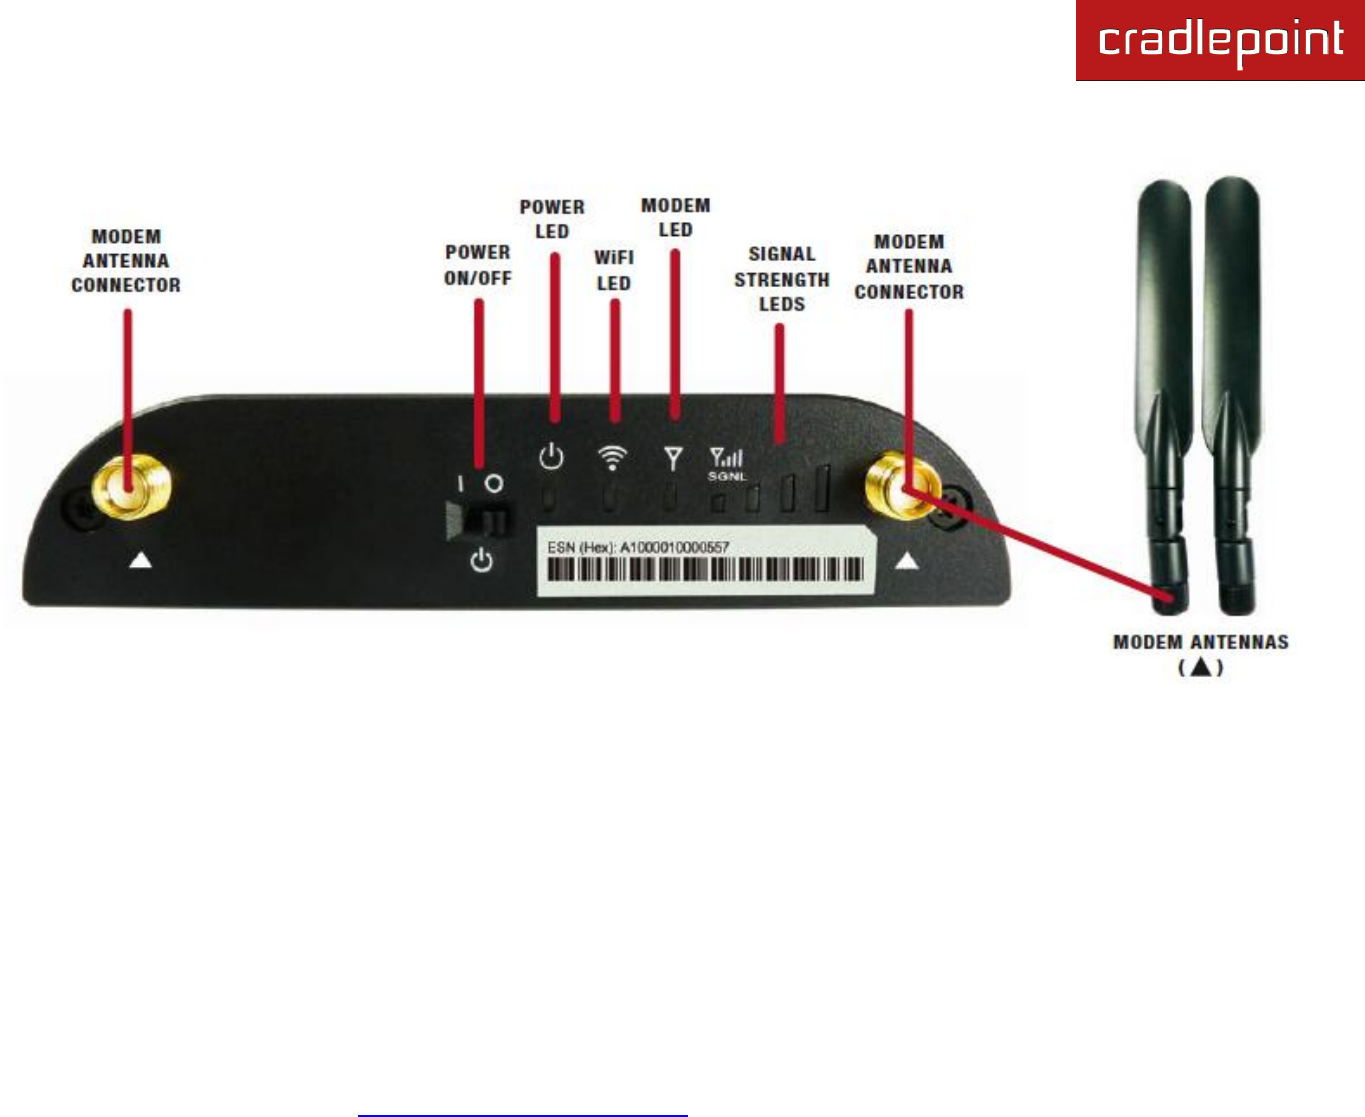 Cradlepoint Ibr600 Users Manual Mobile Broadband Router